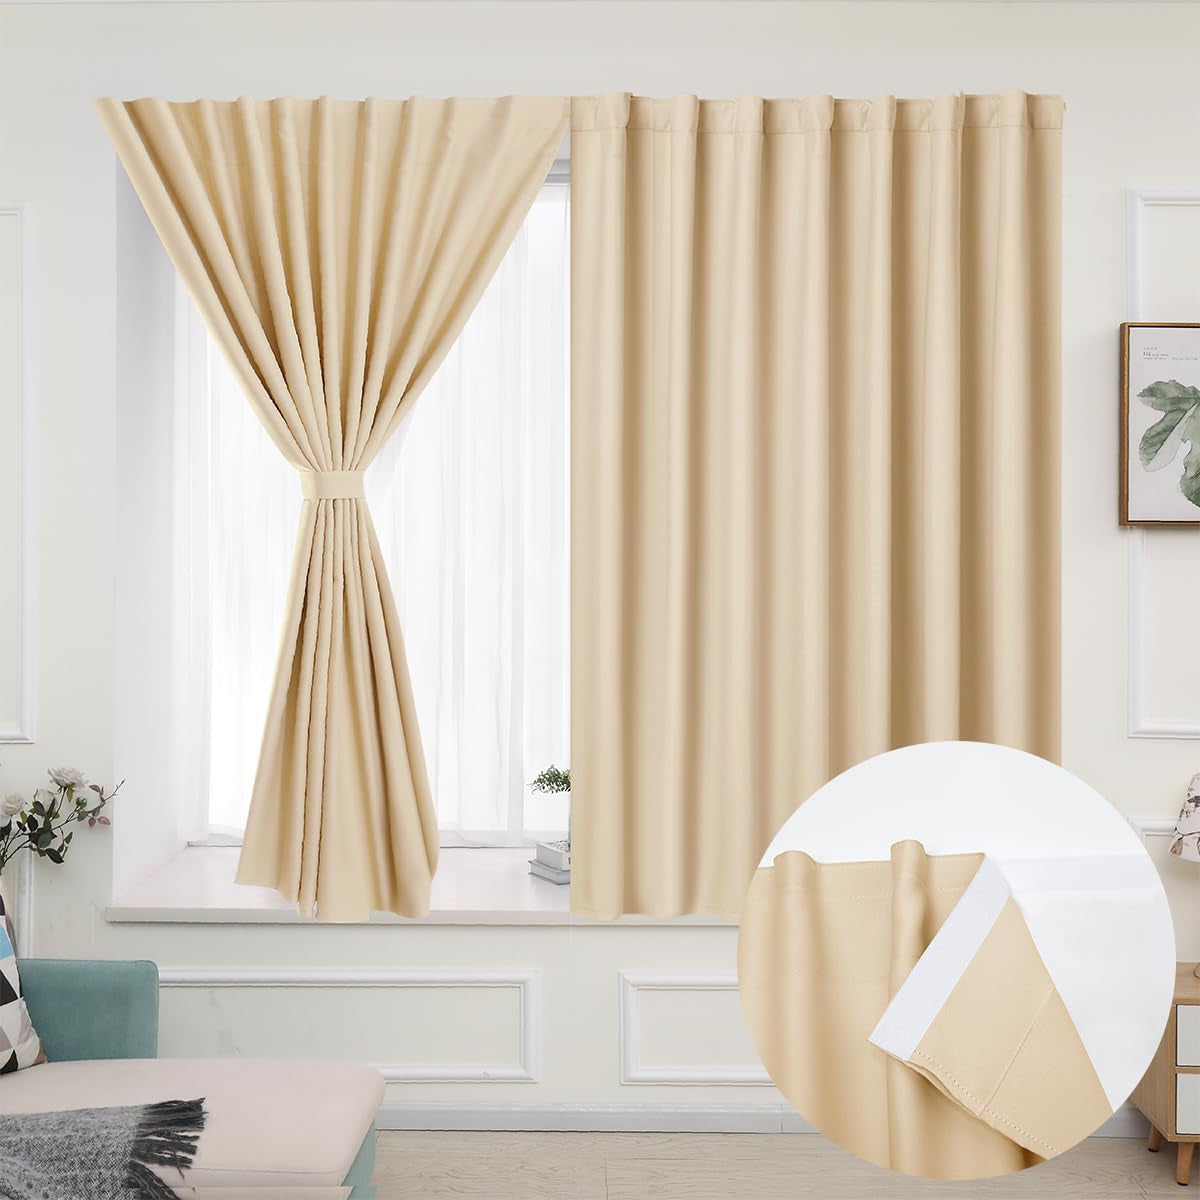 Muamar 2Pcs Blackout Curtains Privacy Curtains 63 Inch Length Window Curtains,Easy Install Thermal Insulated Window Shades,Stick Curtains No Rods, Black 42" W X 63" L  Muamar Beige 42"W X 63"L 